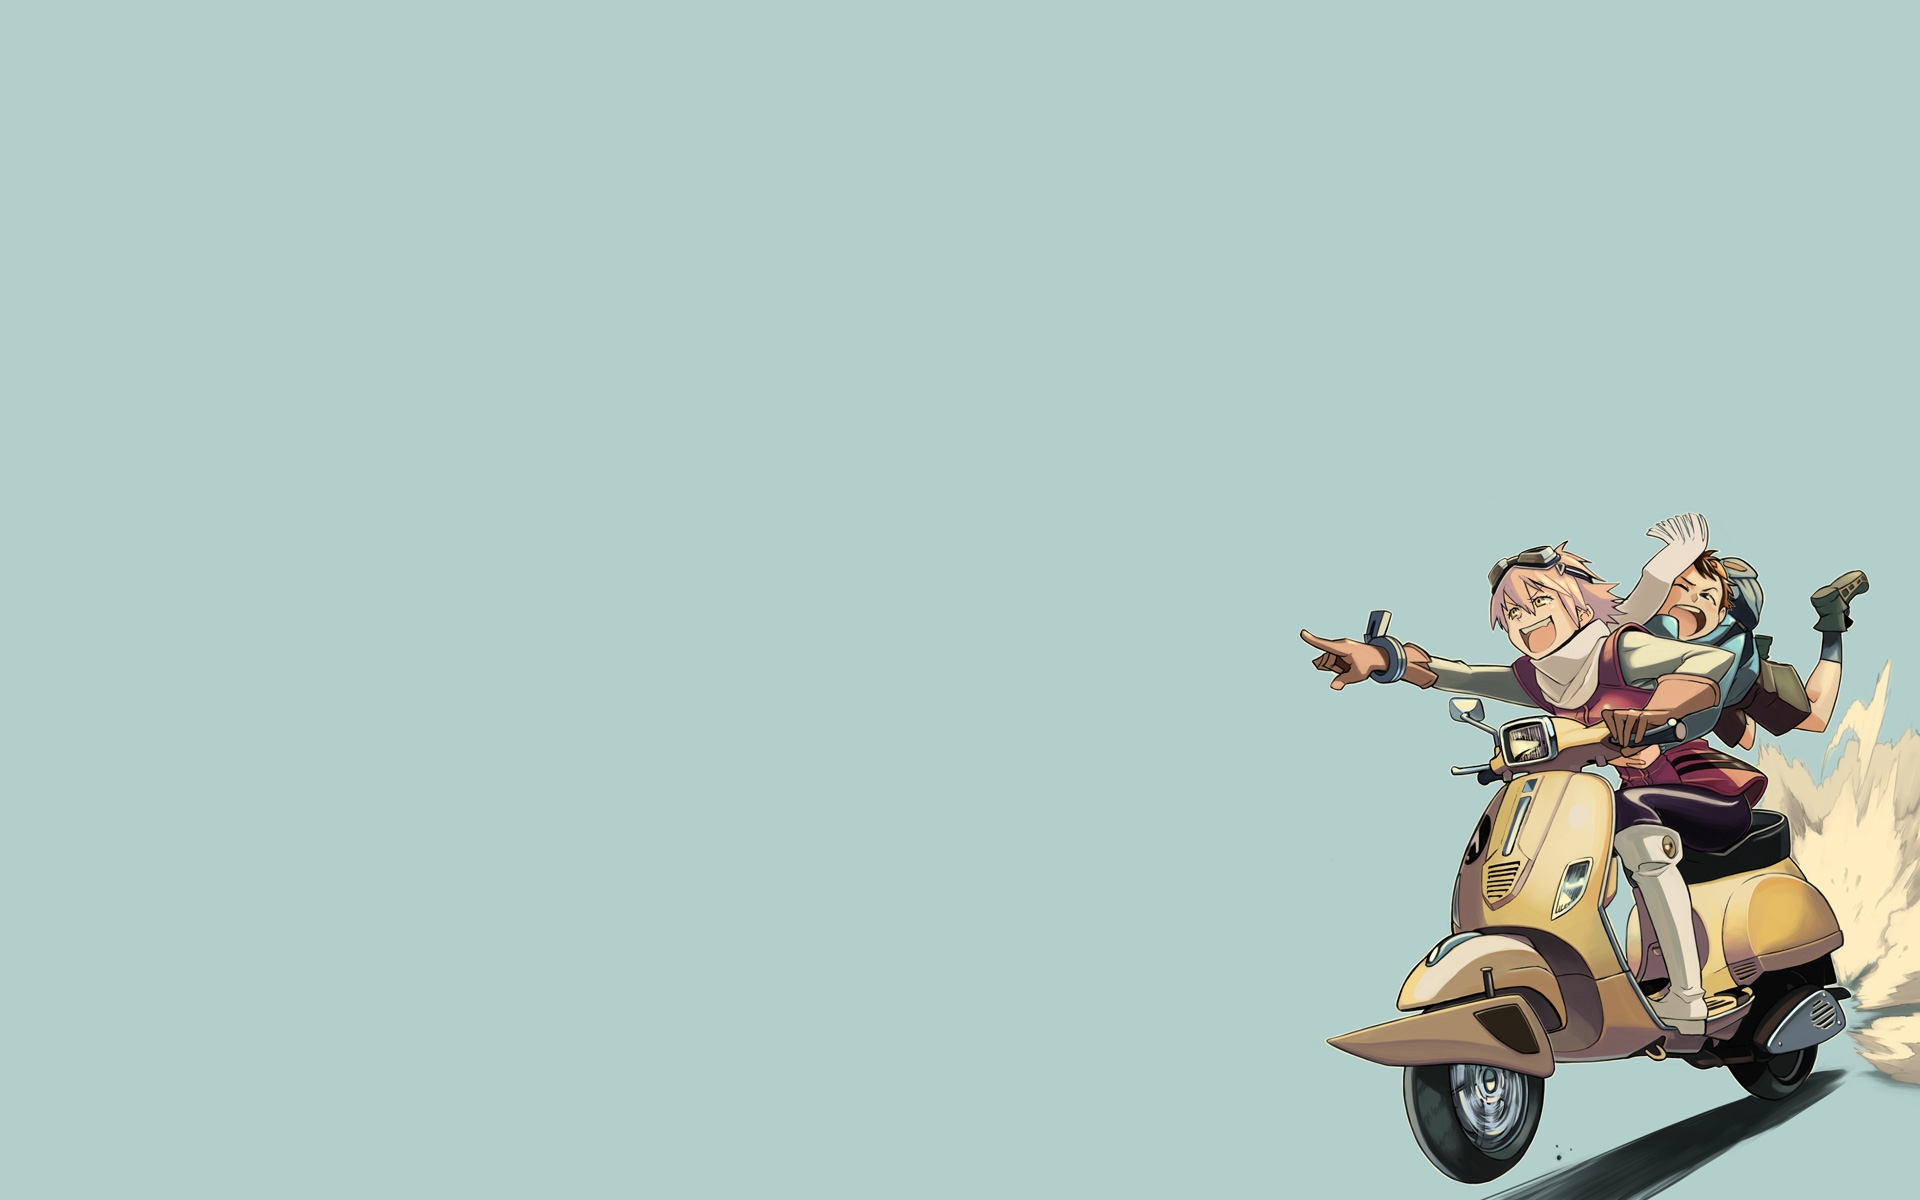 FLCL Fooly Cooly Canti simple background wallpaper  1920x1080  259287   WallpaperUP